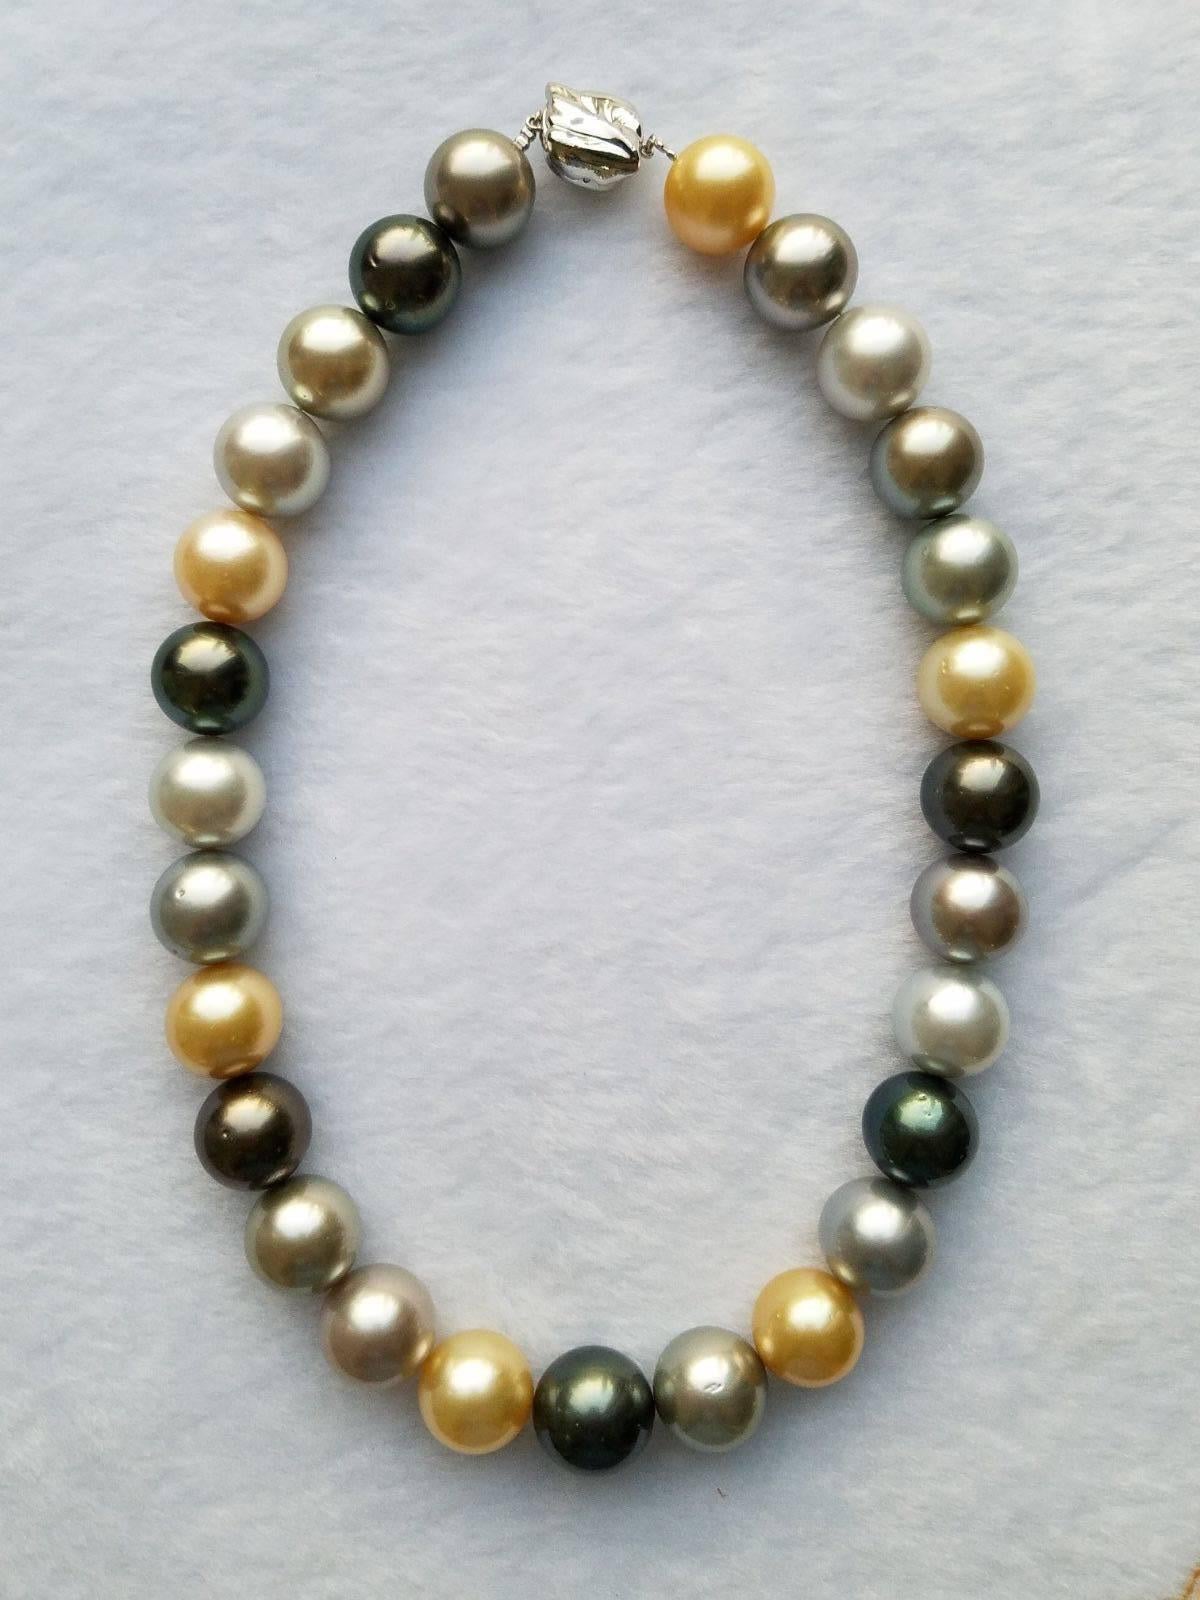 A very elegant strand of 27 multi-coloured natural south sea pearls, ranging from 15 to 17mm in diameter, with a total weight of 42.5 momme. Strung on hand knotted silk cord, this necklace has a silver/gold clasp (which can be change depending on